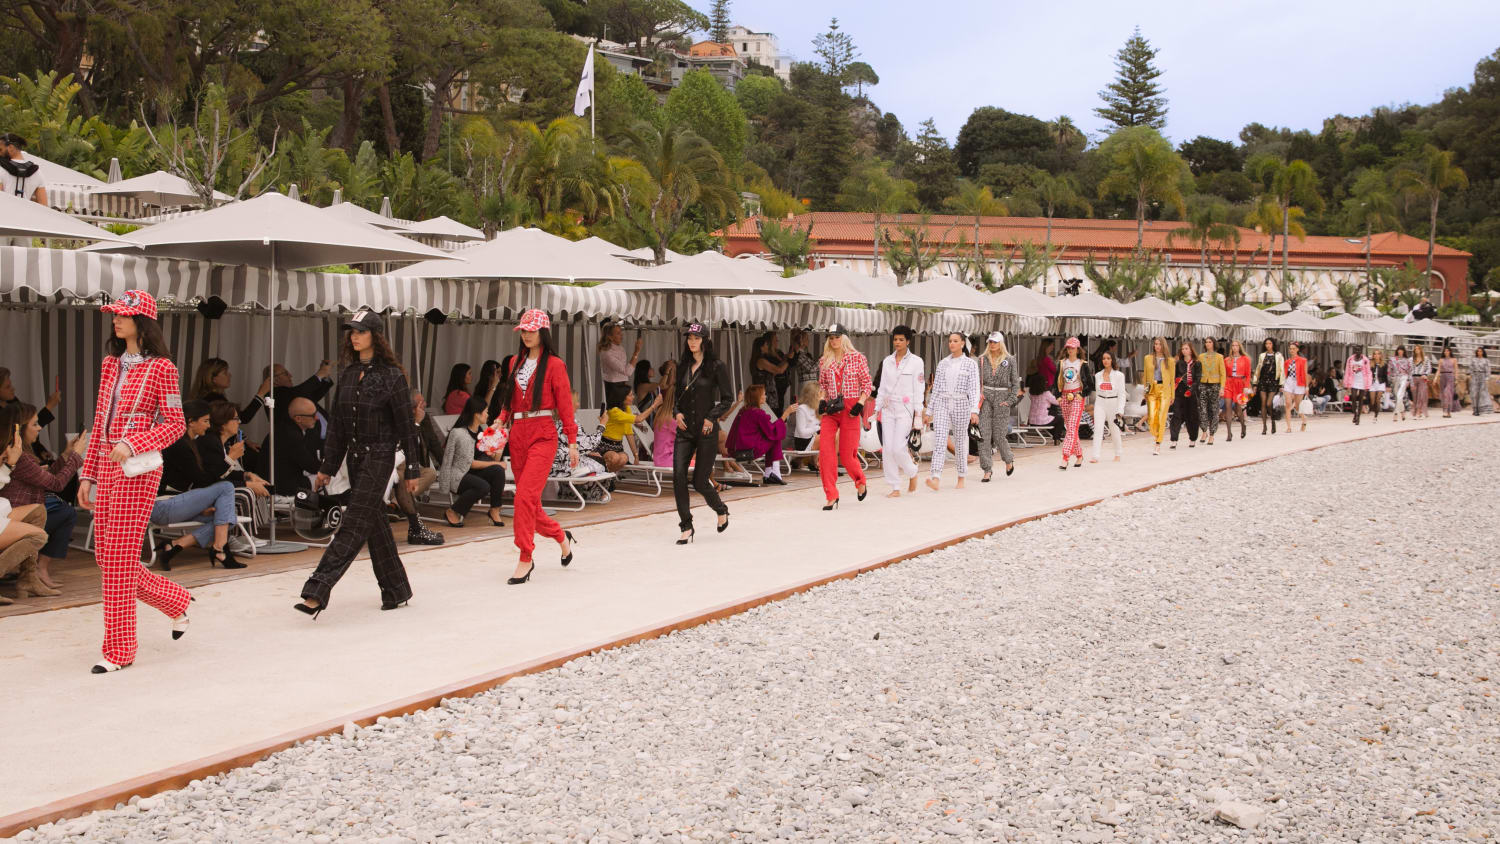 Chanel Cruise show in Monaco was inspired by Formula 1 and the casino